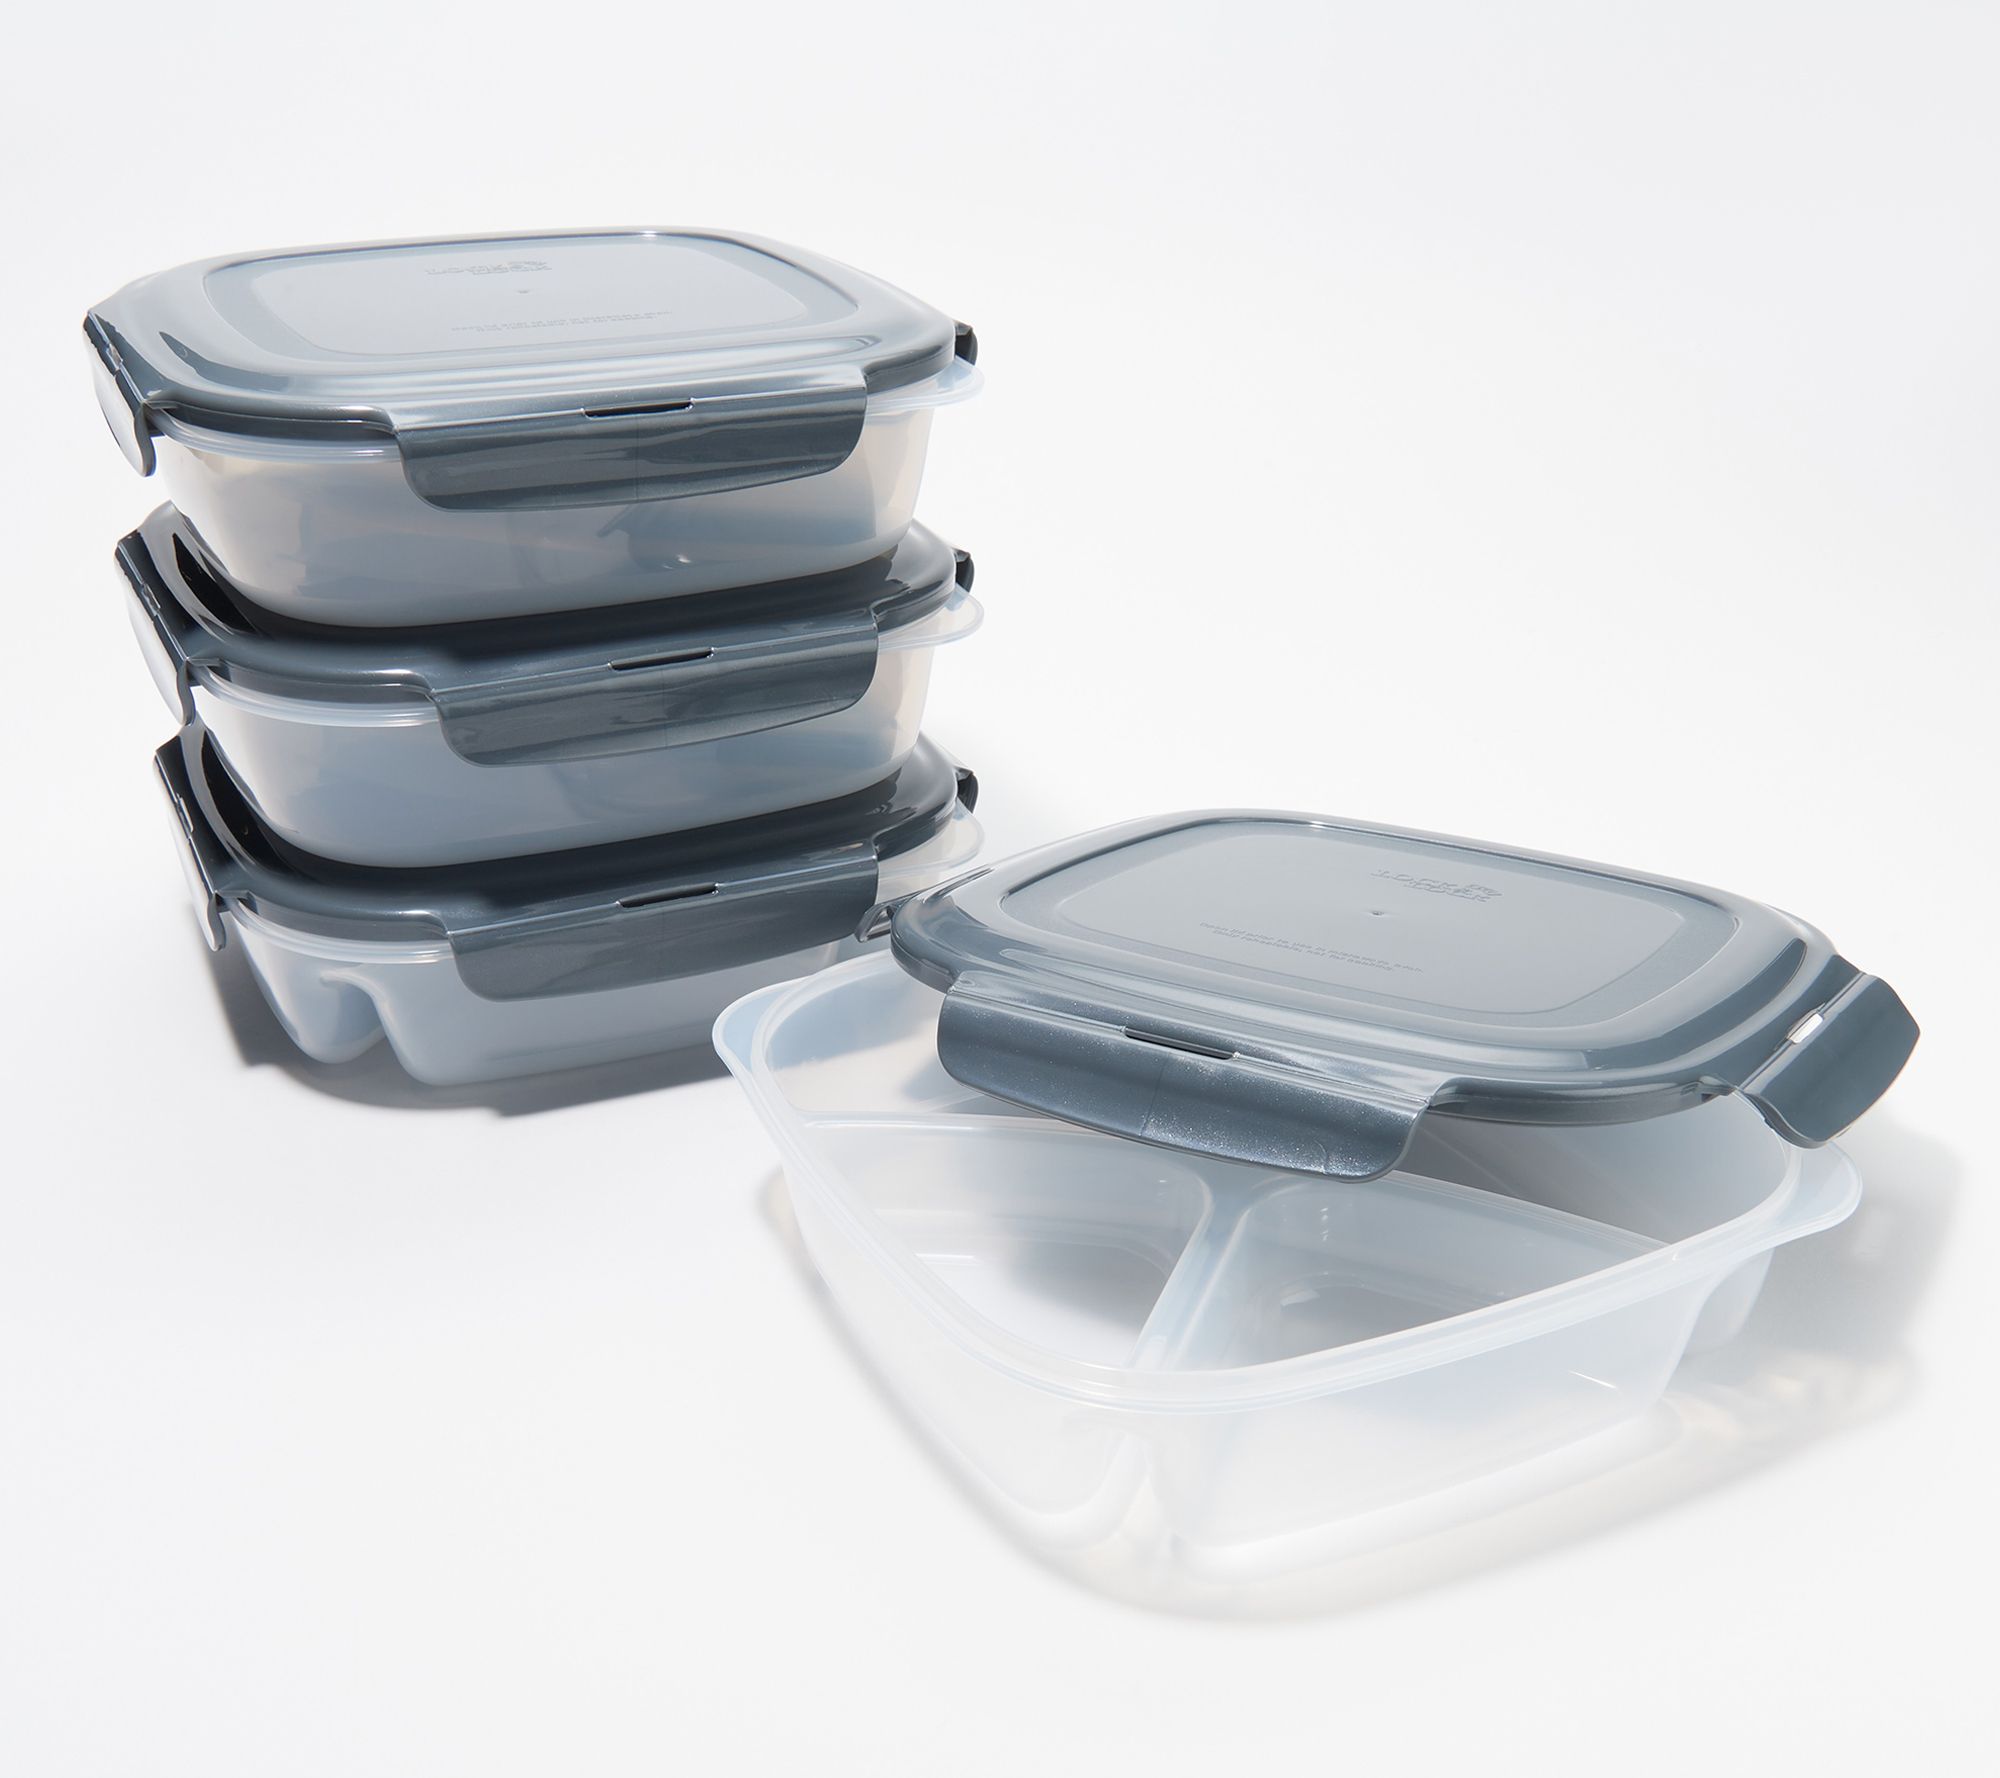 LocknLock 4 piece Divider Plates with Color Lids 